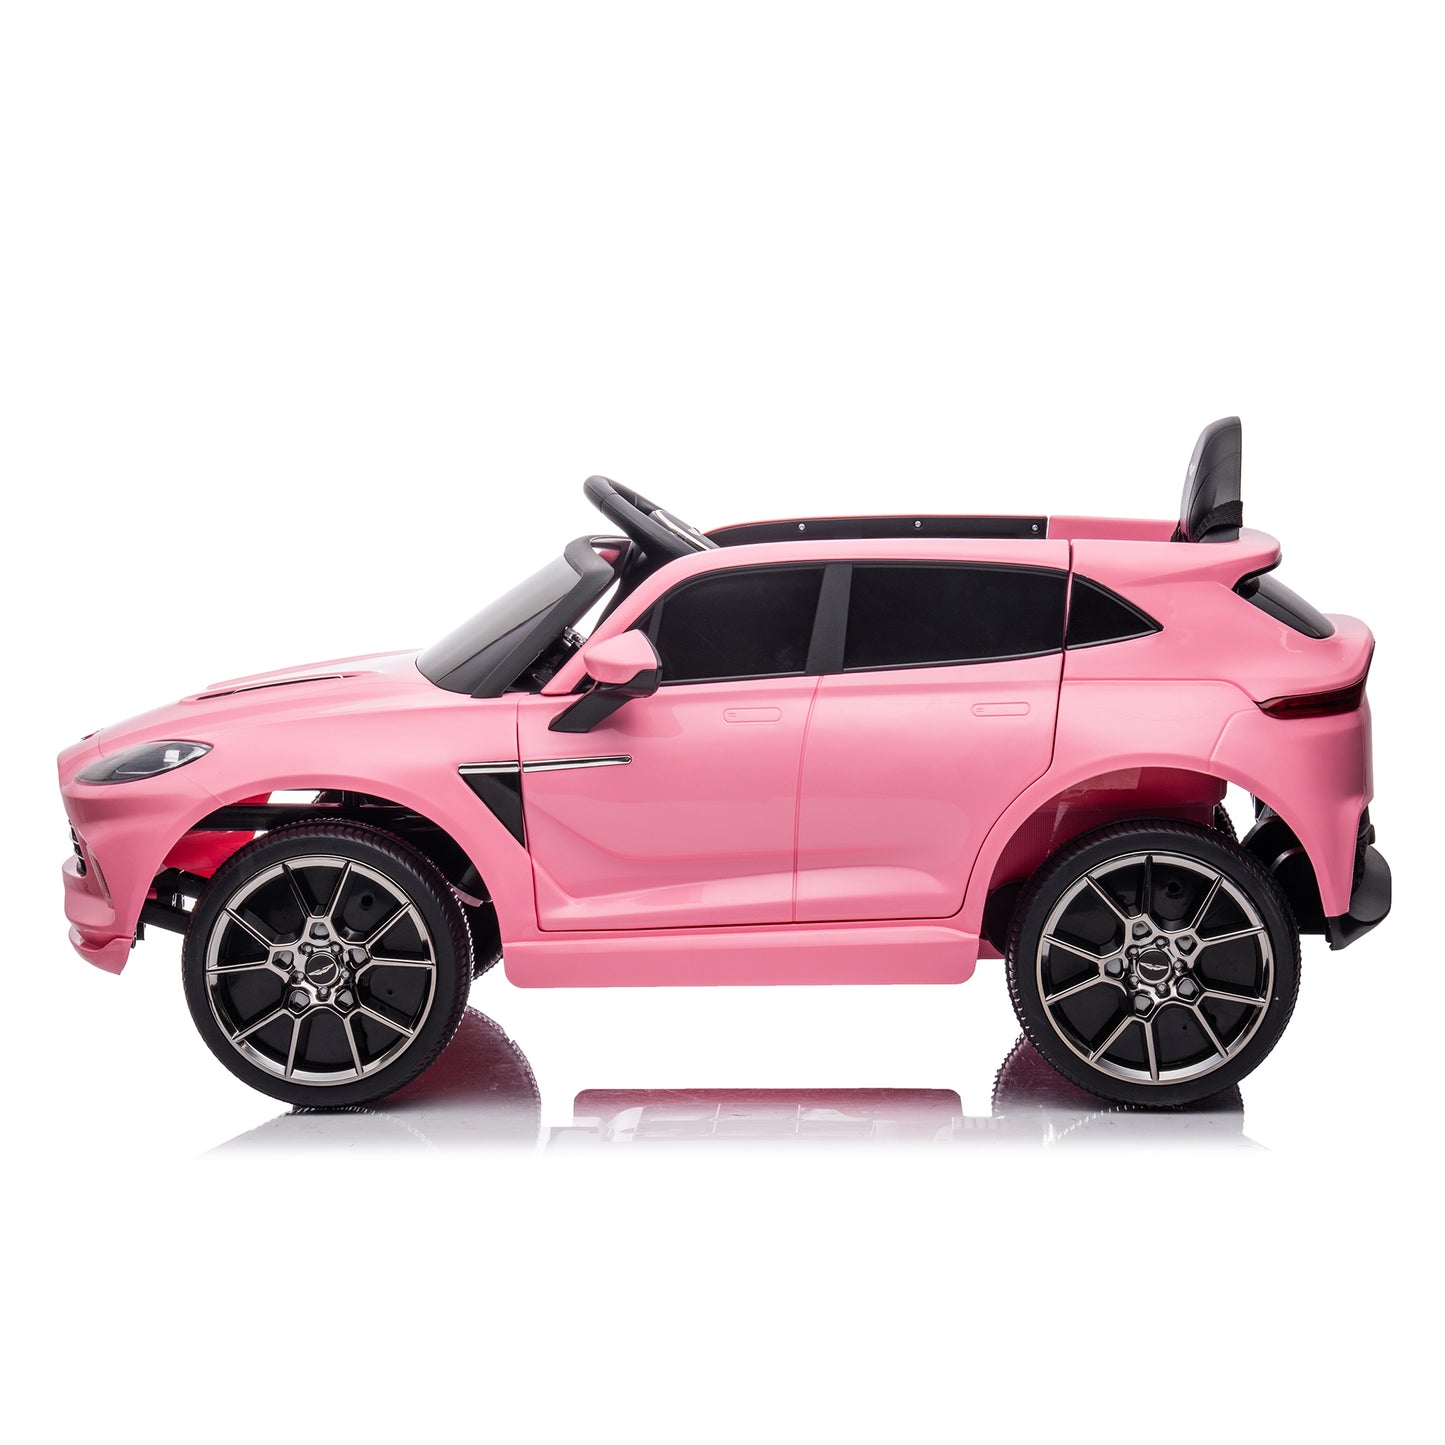 12V Dual-drive remote control electric Kid Ride On Car,Battery Powered Kids Ride-on Car pink, 4 Wheels Children toys vehicle,LED Headlights,remote control,music,USB.